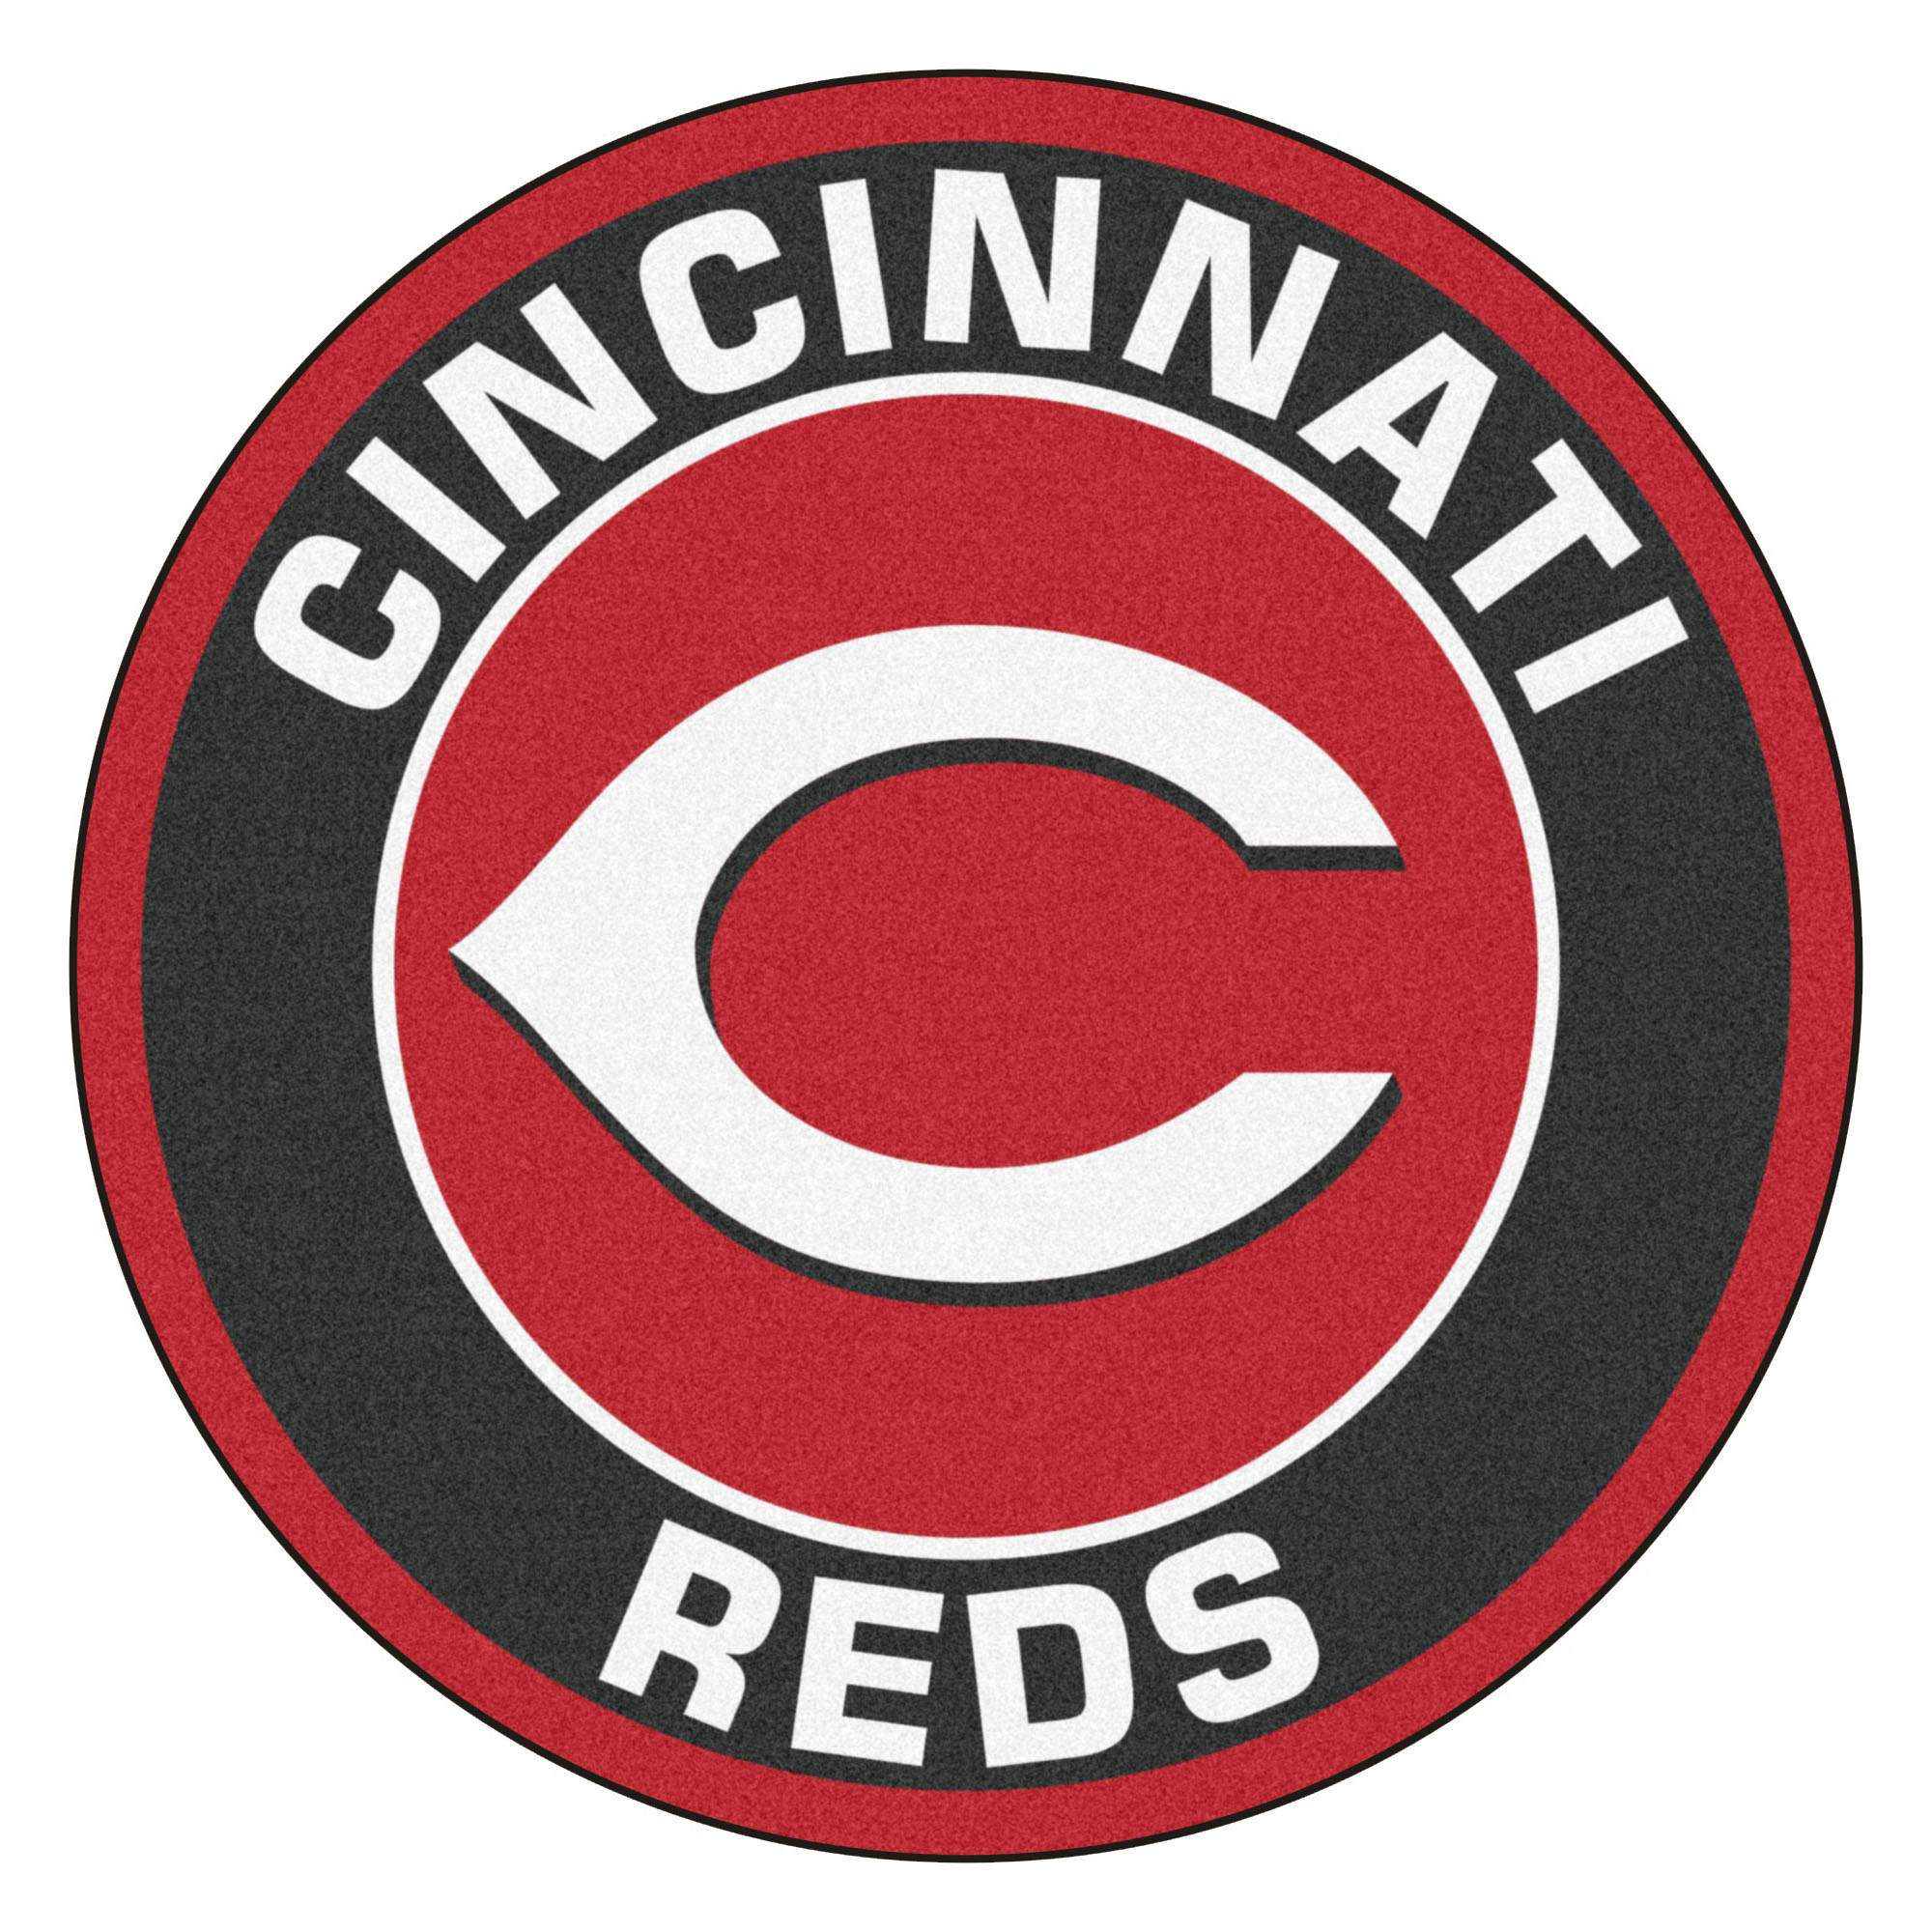 Presale Codes for Opening Day 2018 - Cincinnati Reds